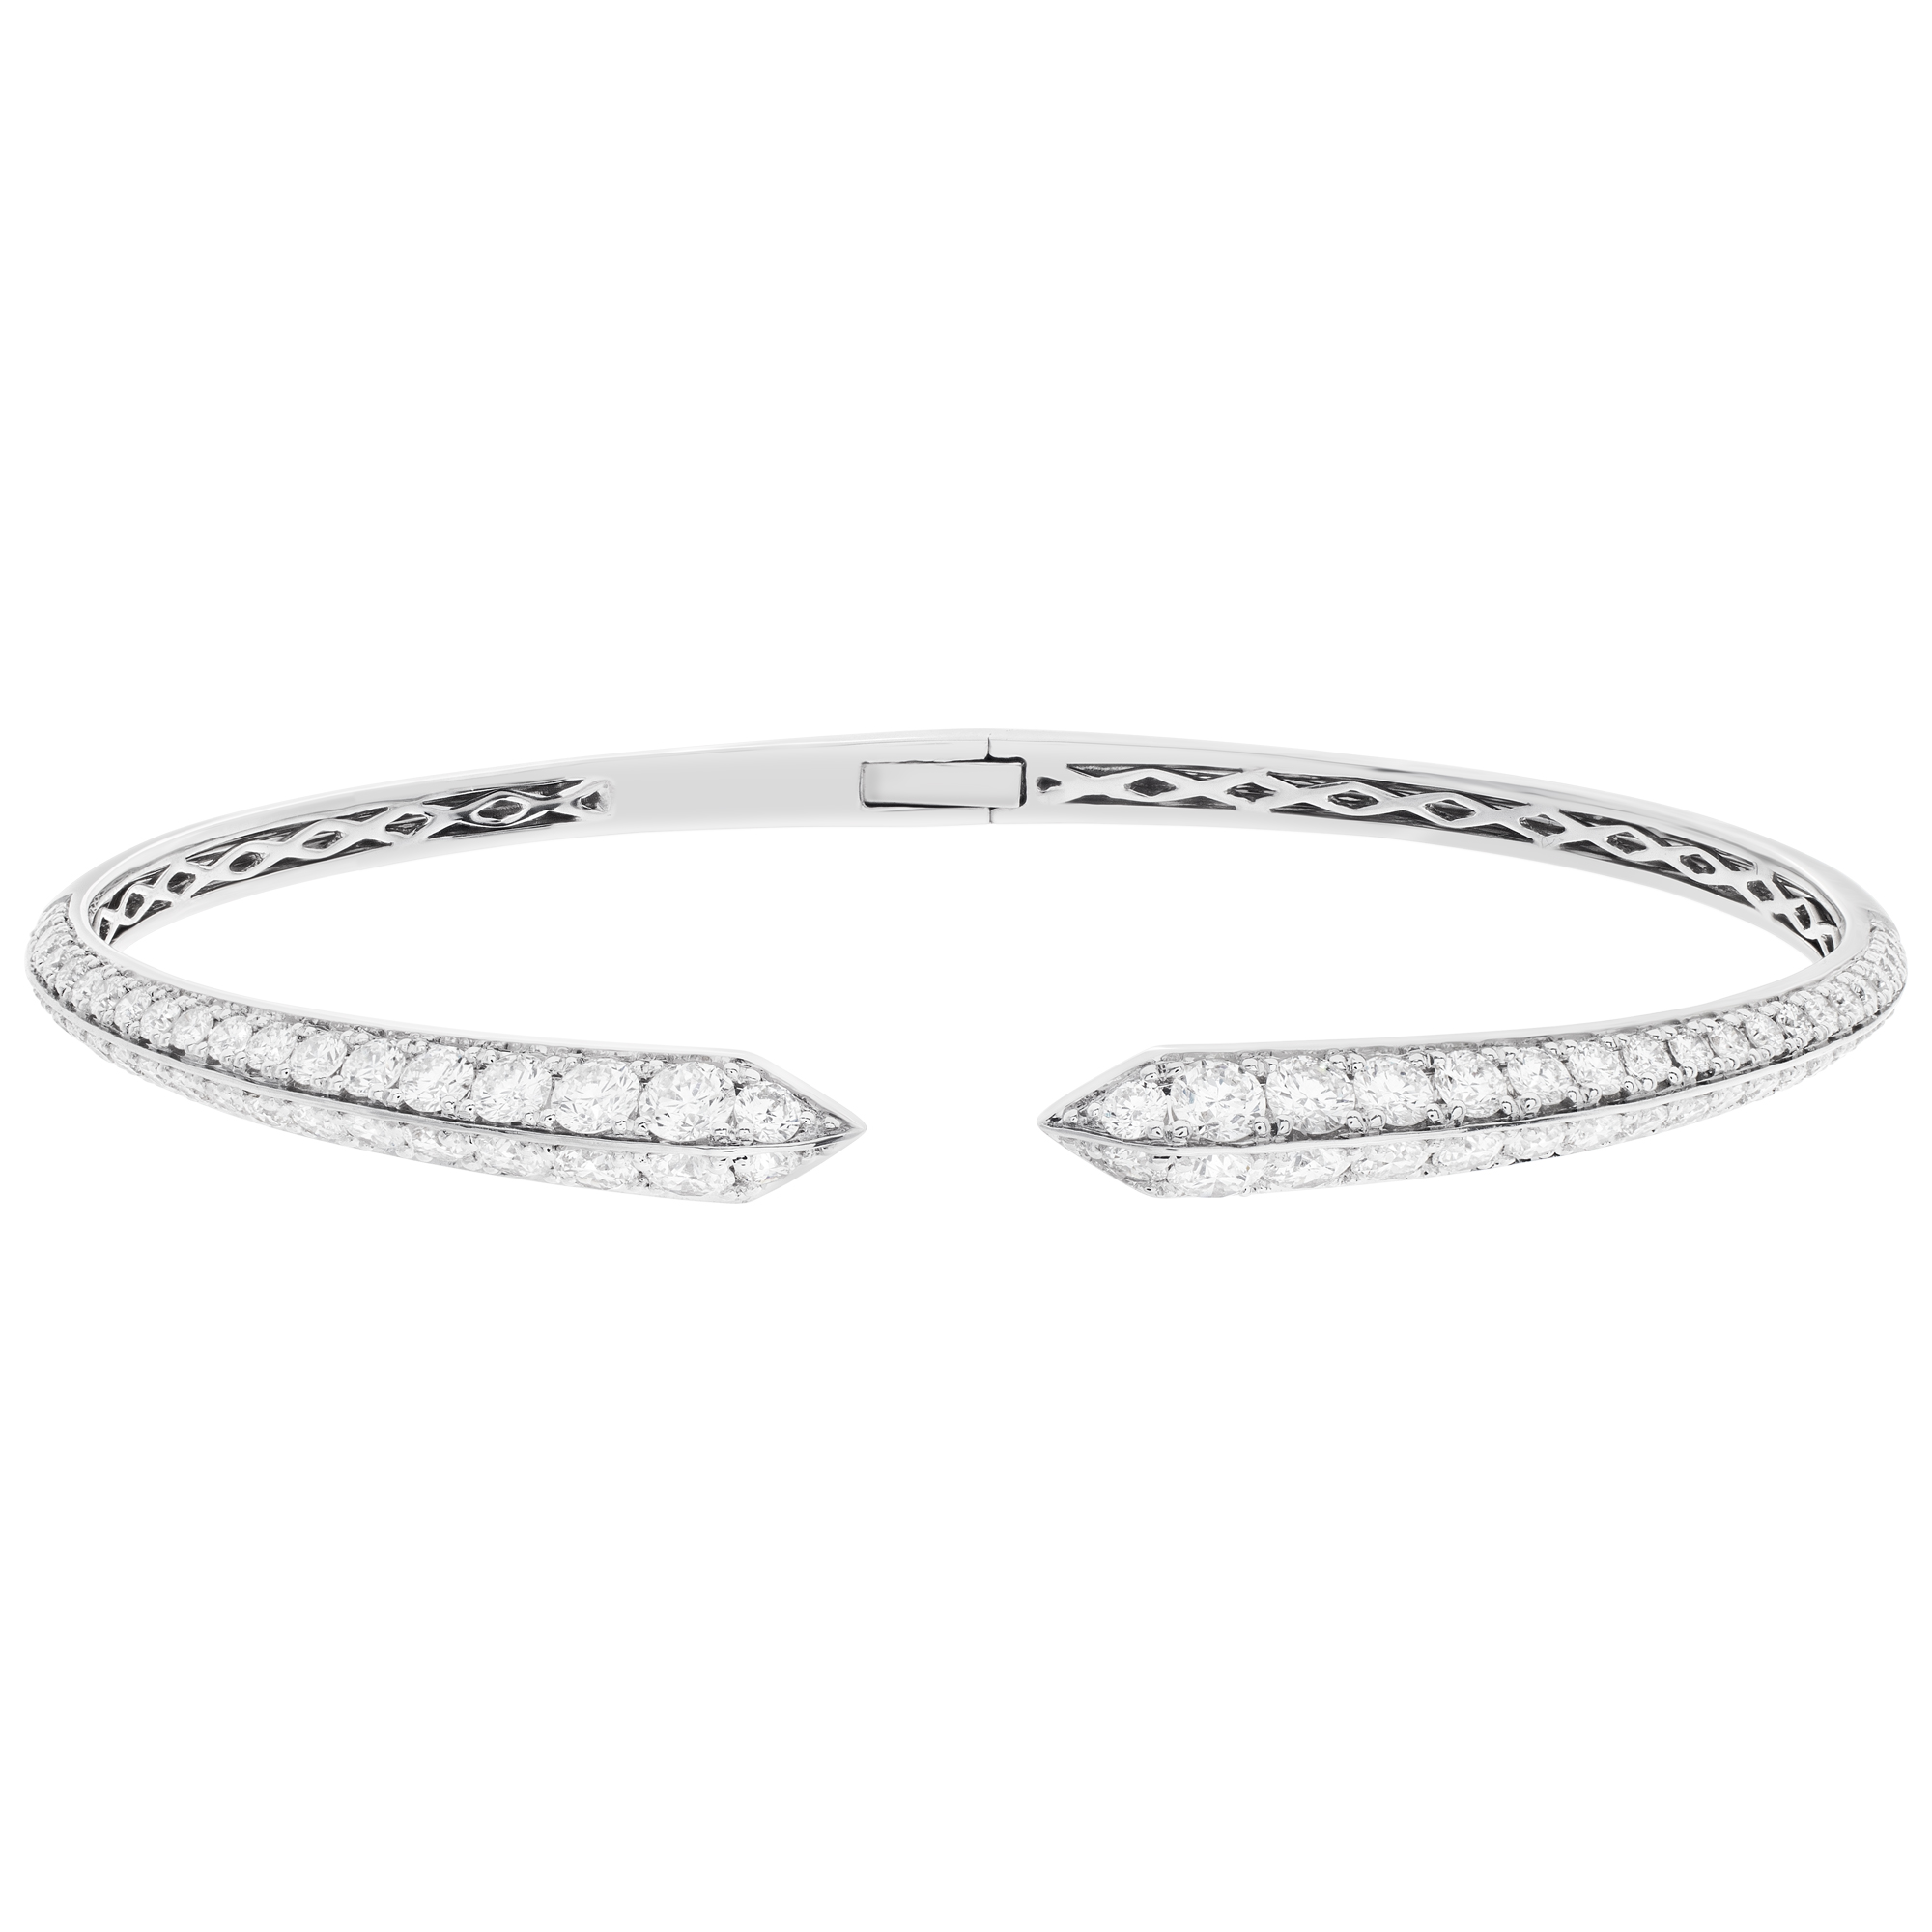 Stunning 18k white gold bangle with 2.36 carats in diamonds. Fits up to 7.5'' wristt